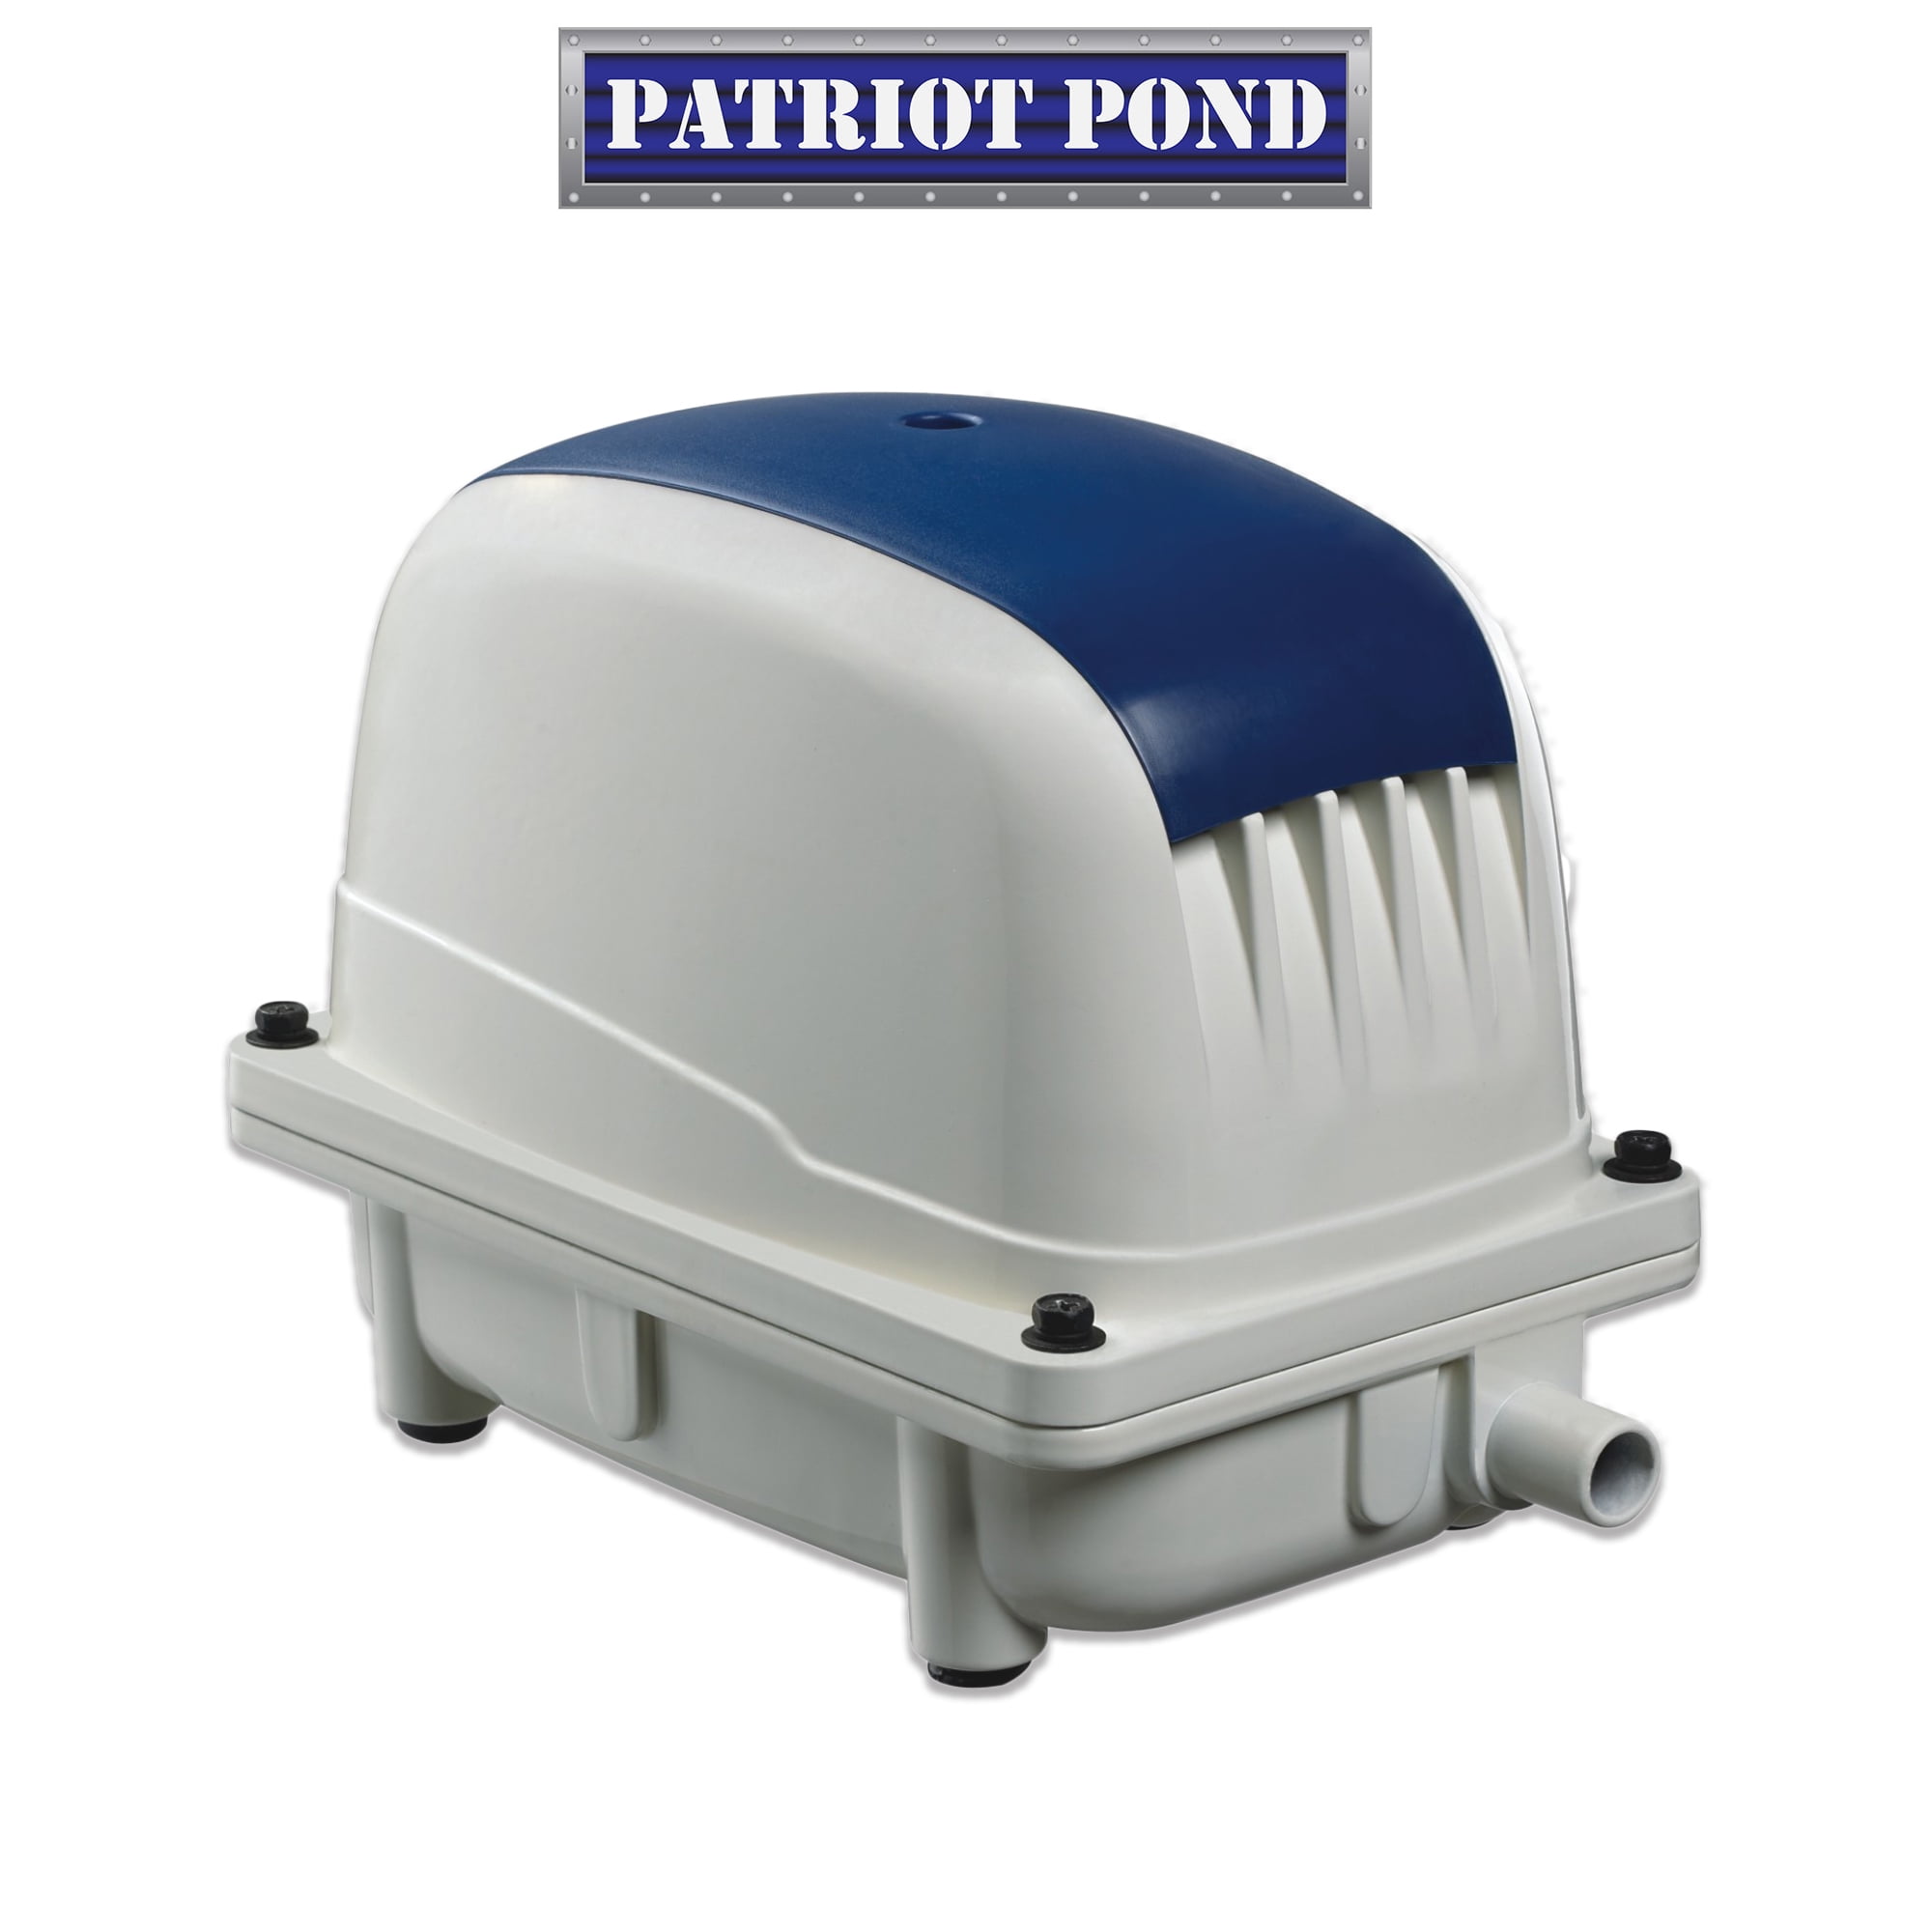 Pond Depth to 15 Feet HALF OFF PONDS Patriot Pond 2.1 Cubic Feet Per Minute Subsurface Aeration Air Pump PA-45 